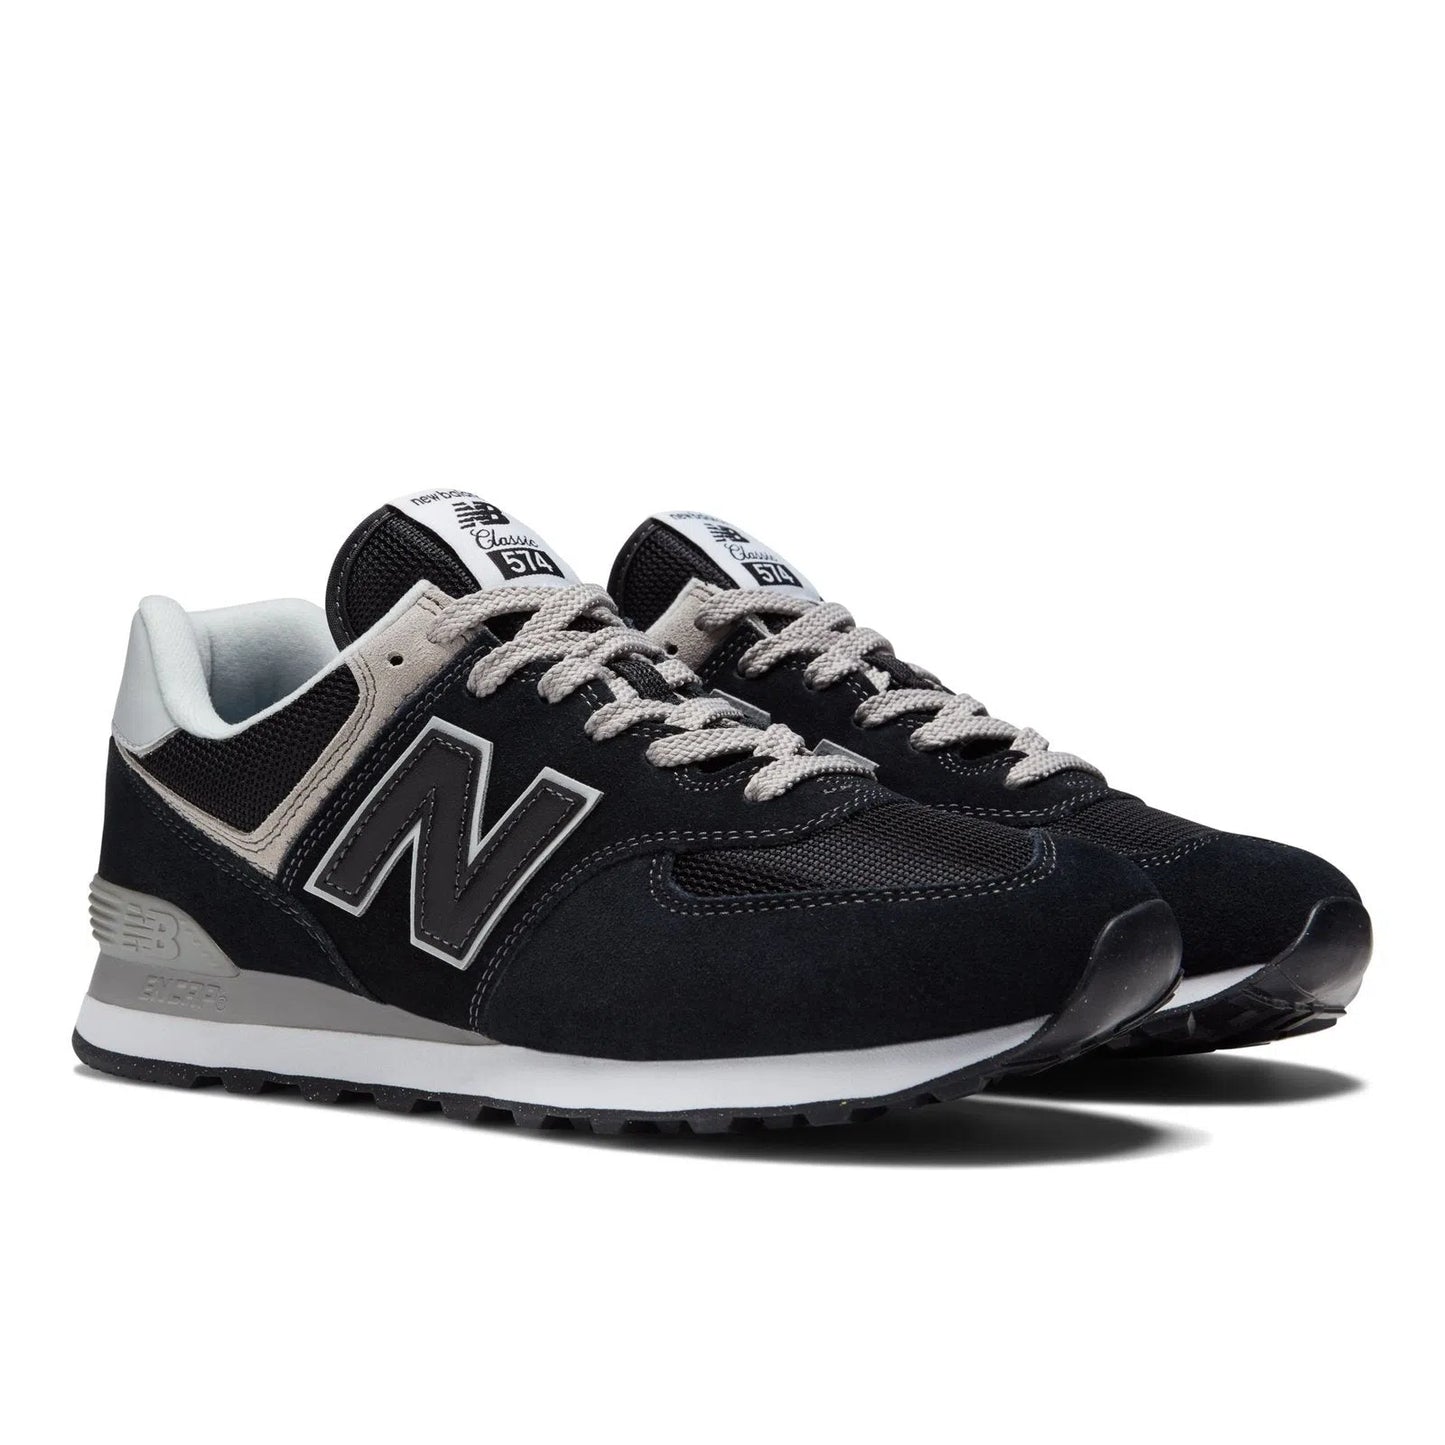 New Balance 574 Core Black with White-LOTABY